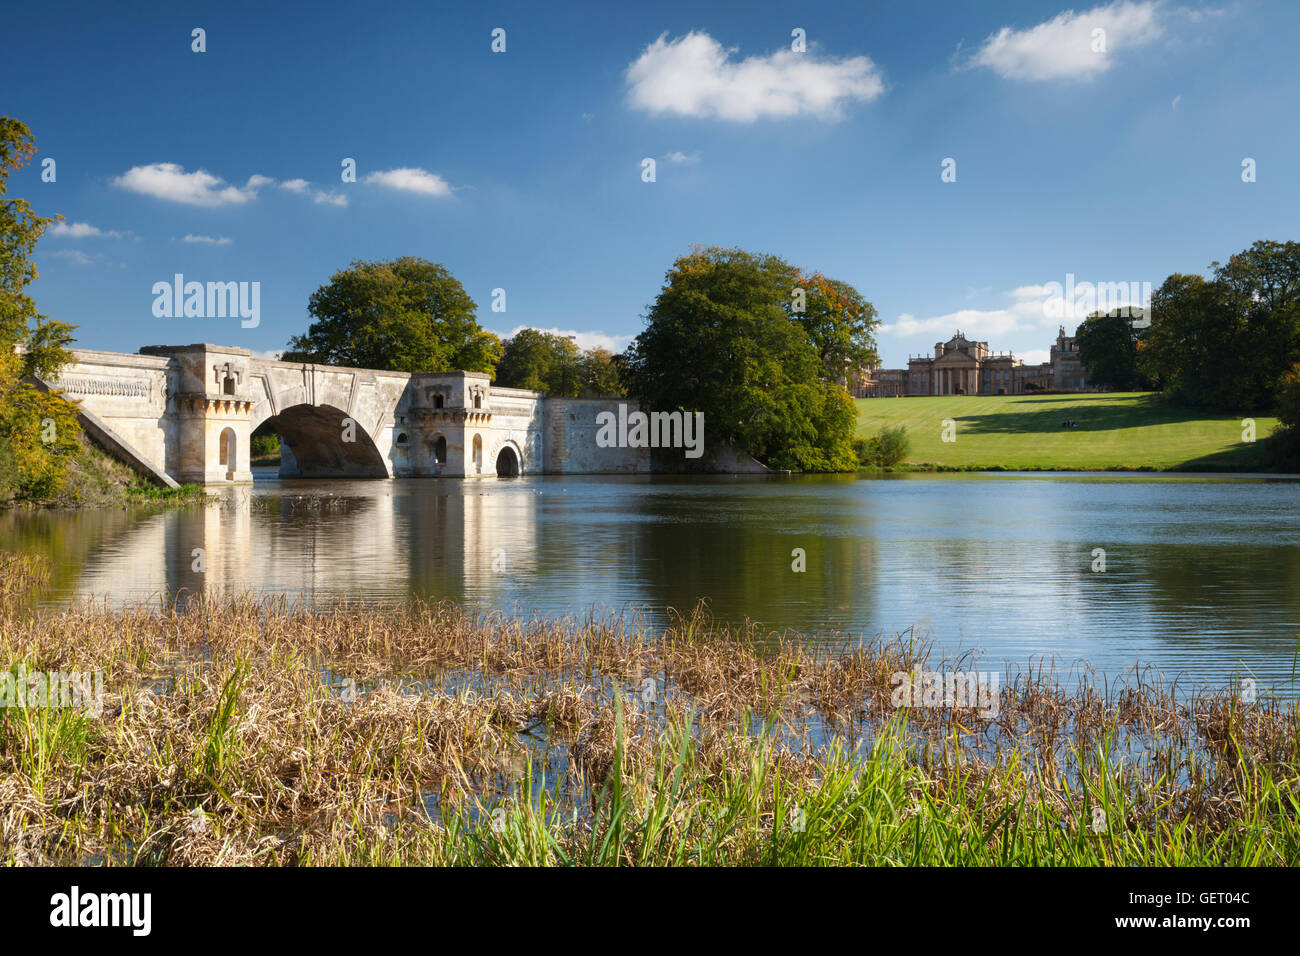 Looking across the lake created by Lancelot Capability Brown beside the Grand Bridge towards Blenheim Palace. Stock Photo